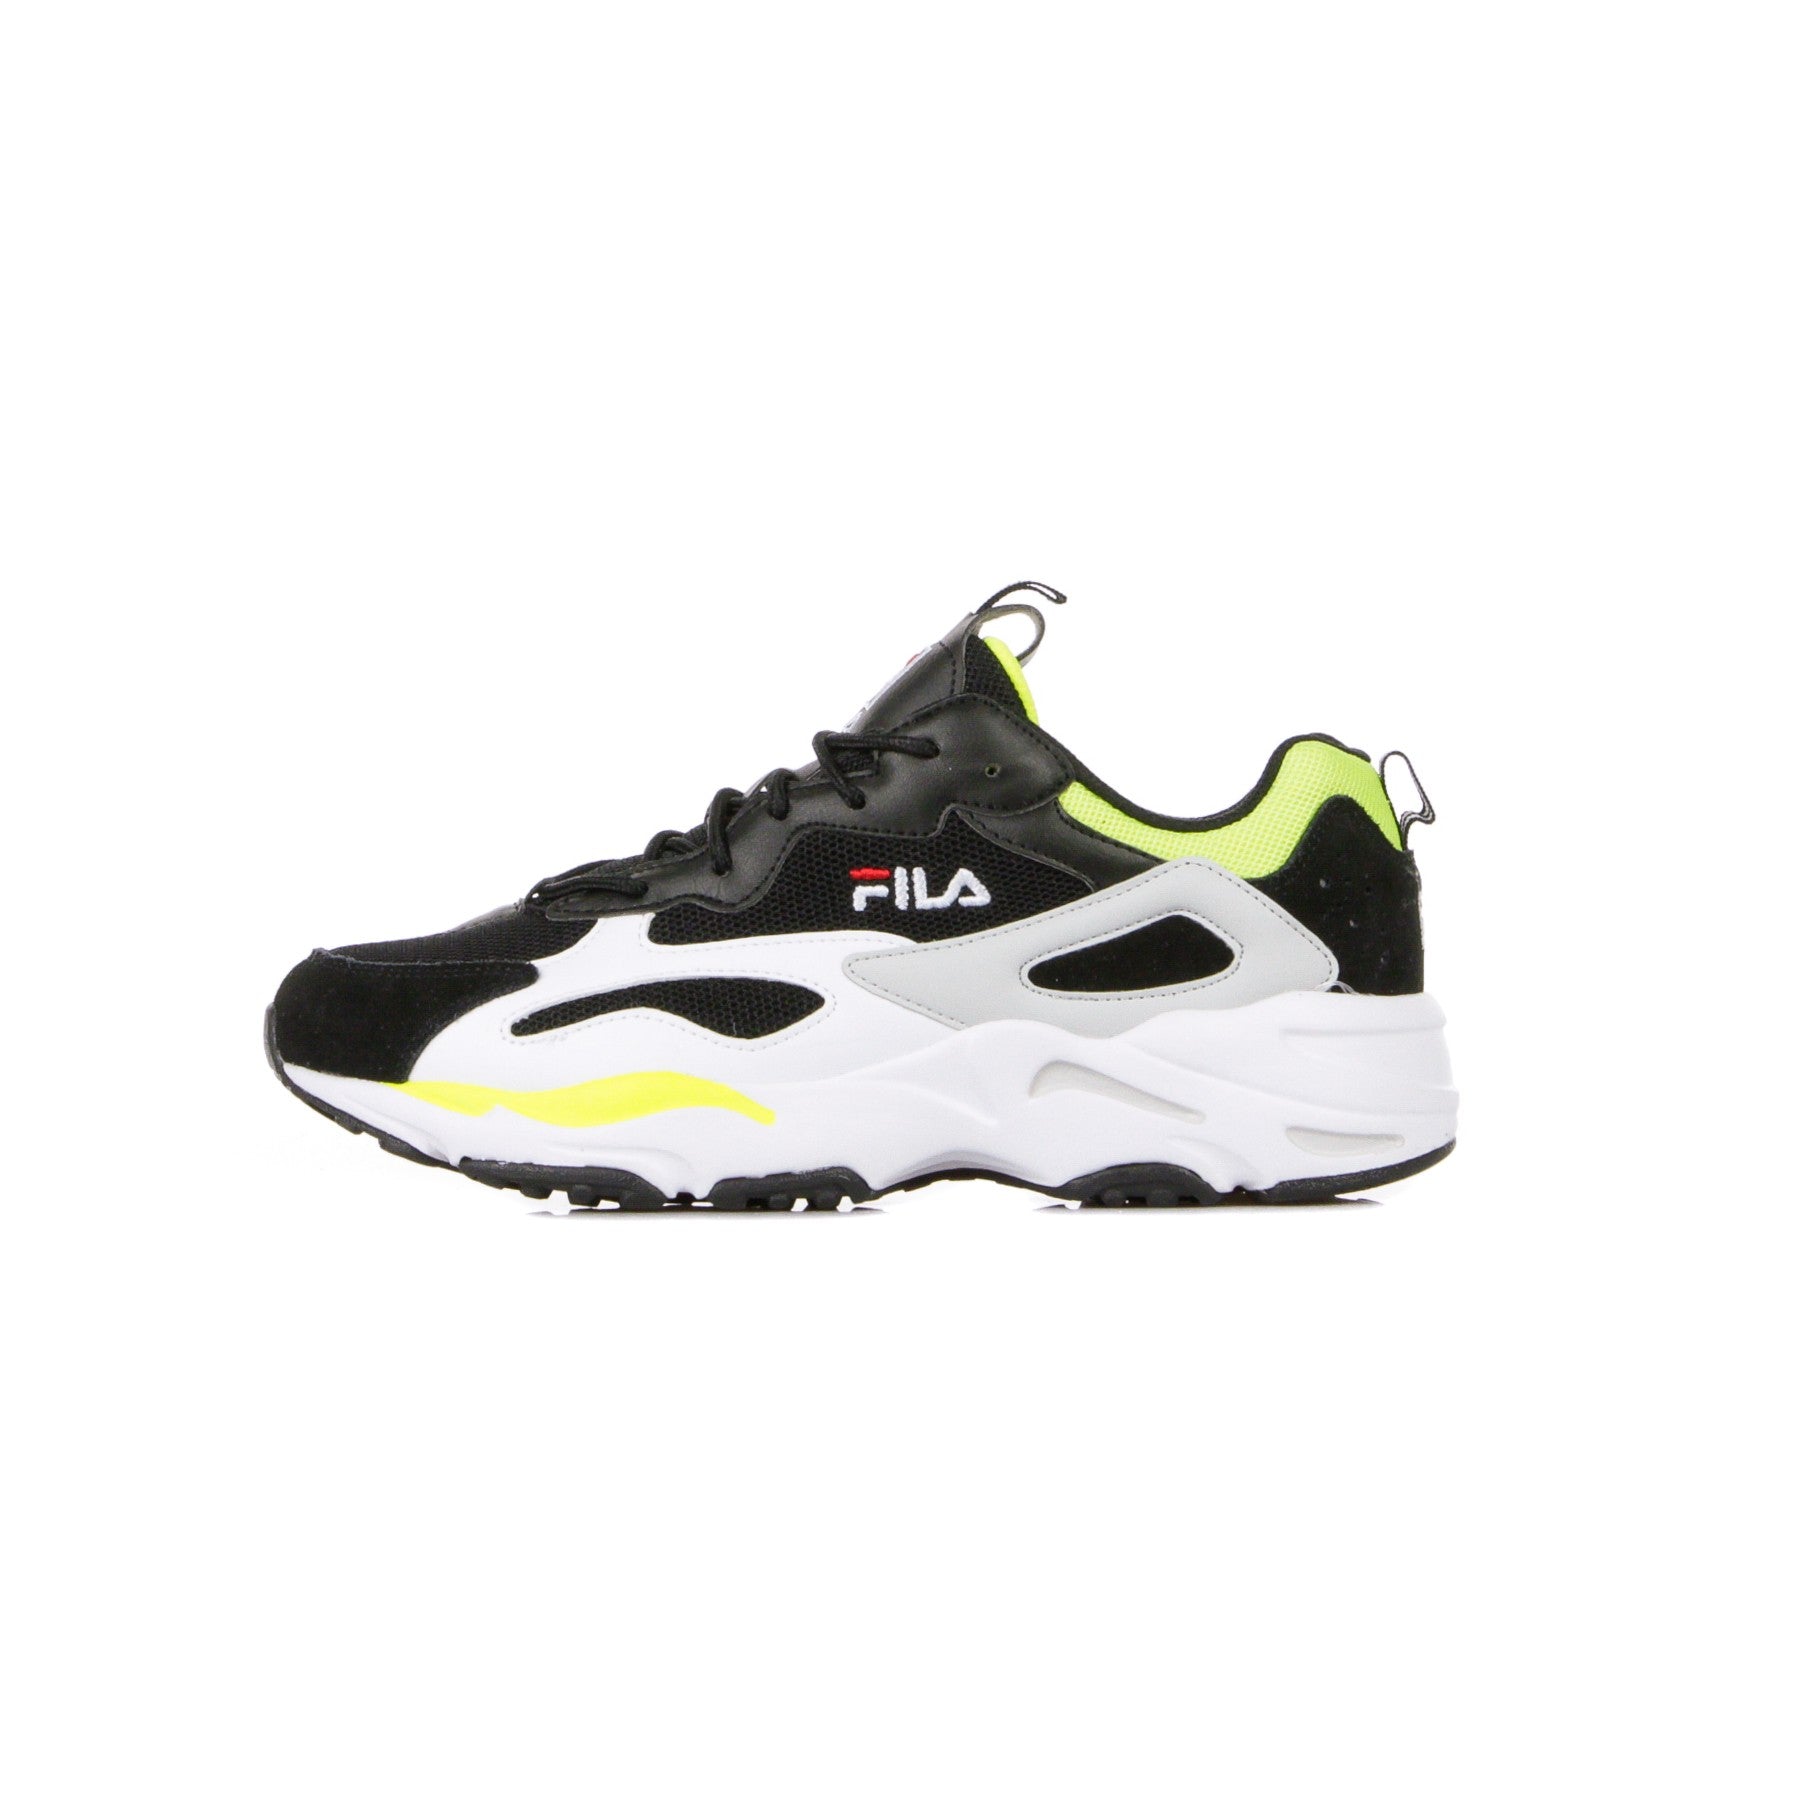 Ray Tracer Cb Black/neon Lime Men's Low Shoe